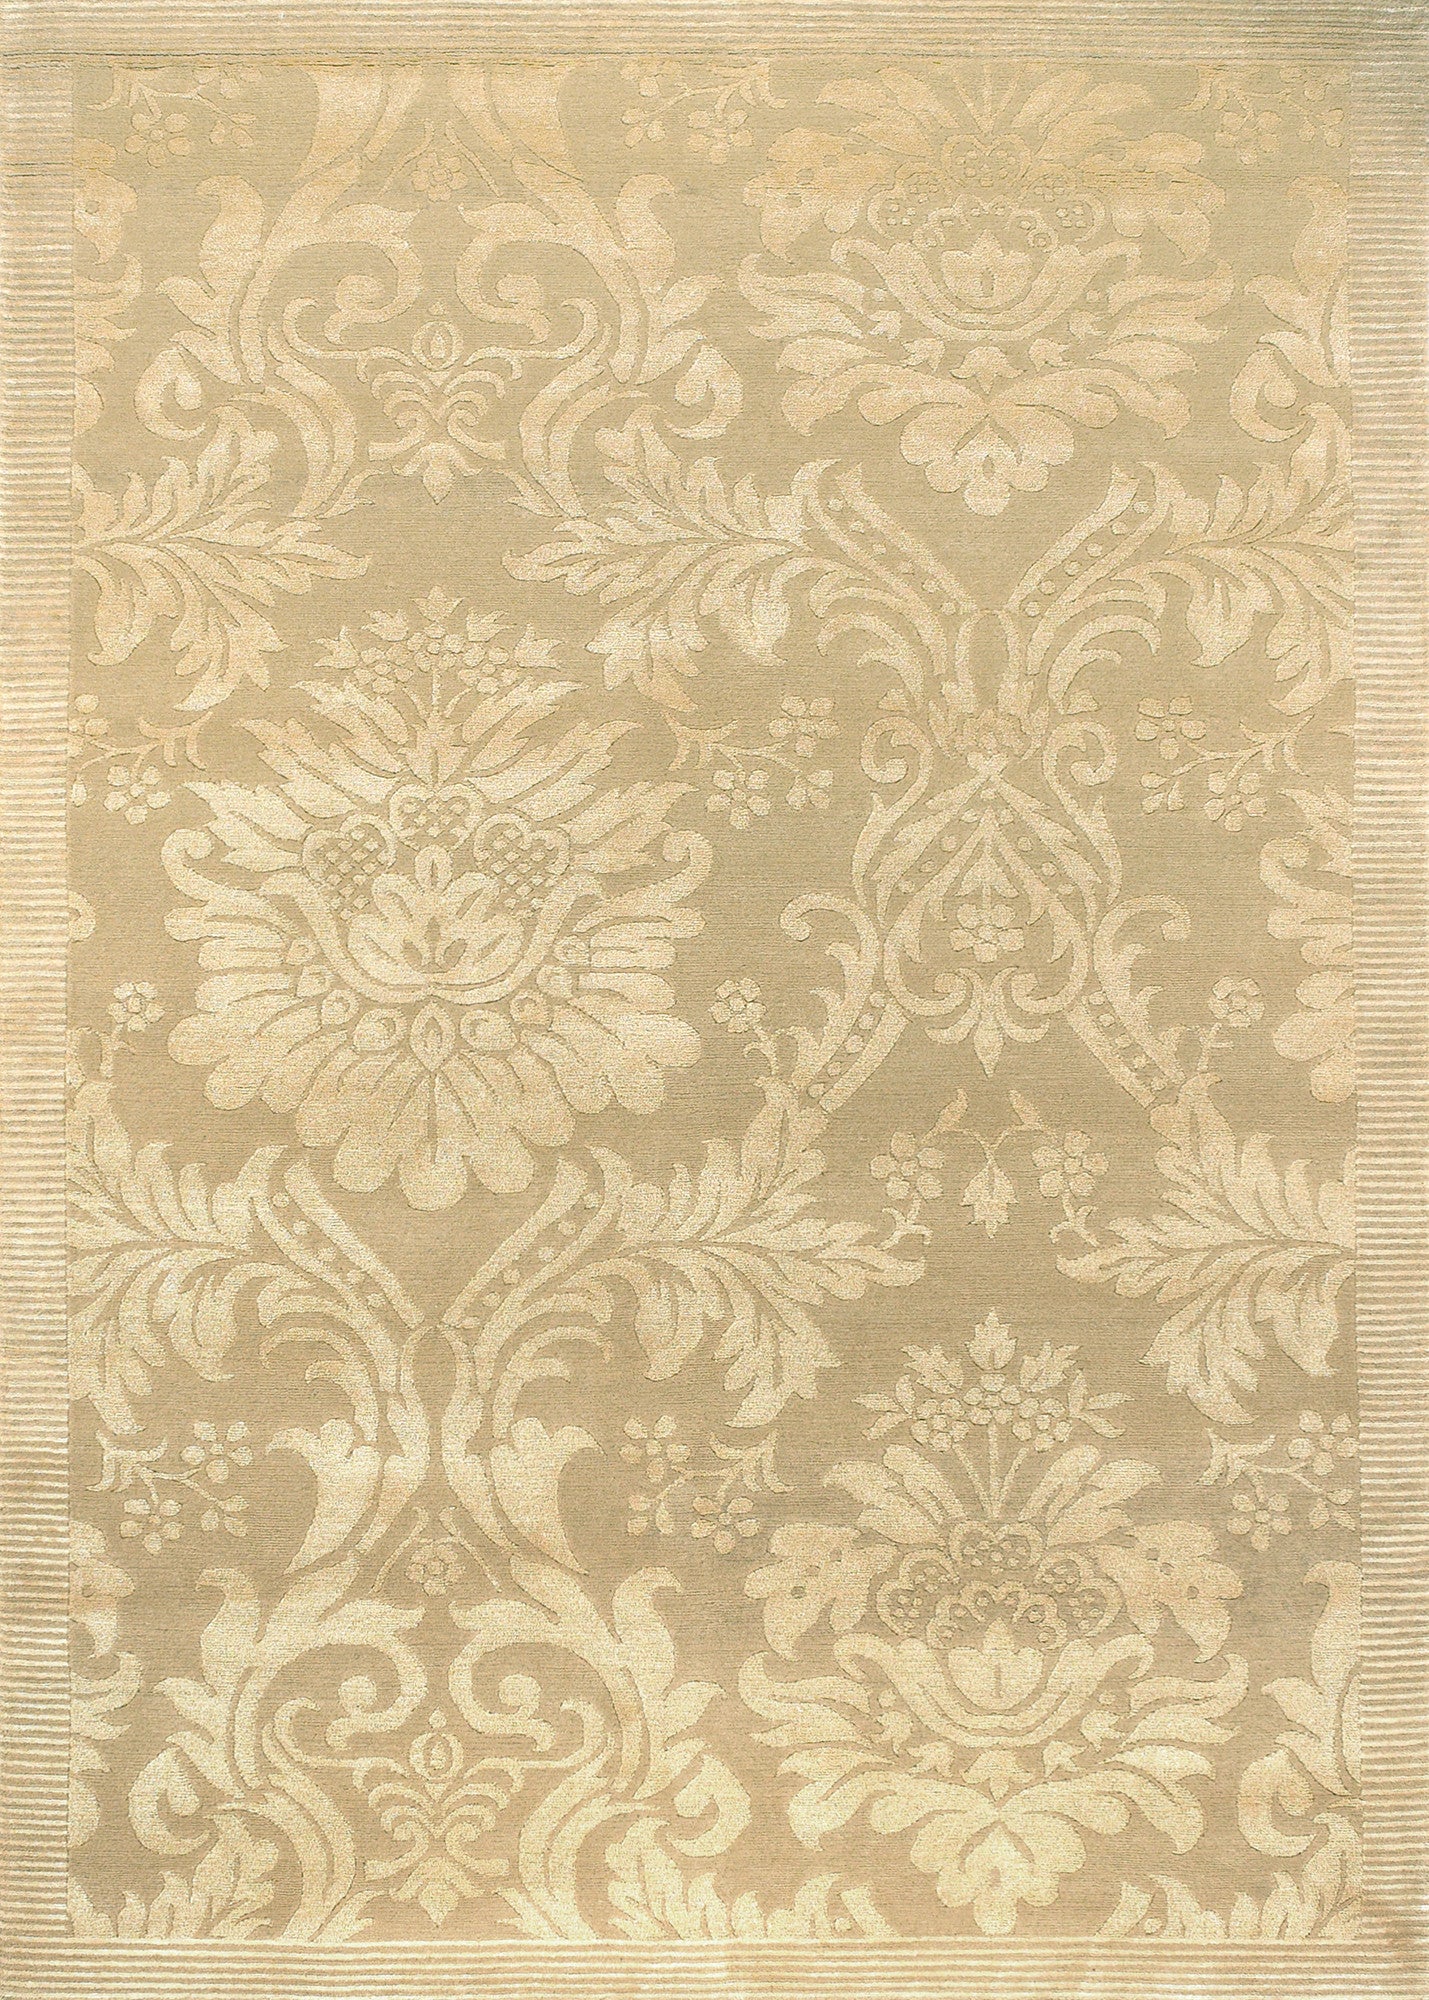 Couristan Impressions Antique Damask Gold/Ivory Area Rug